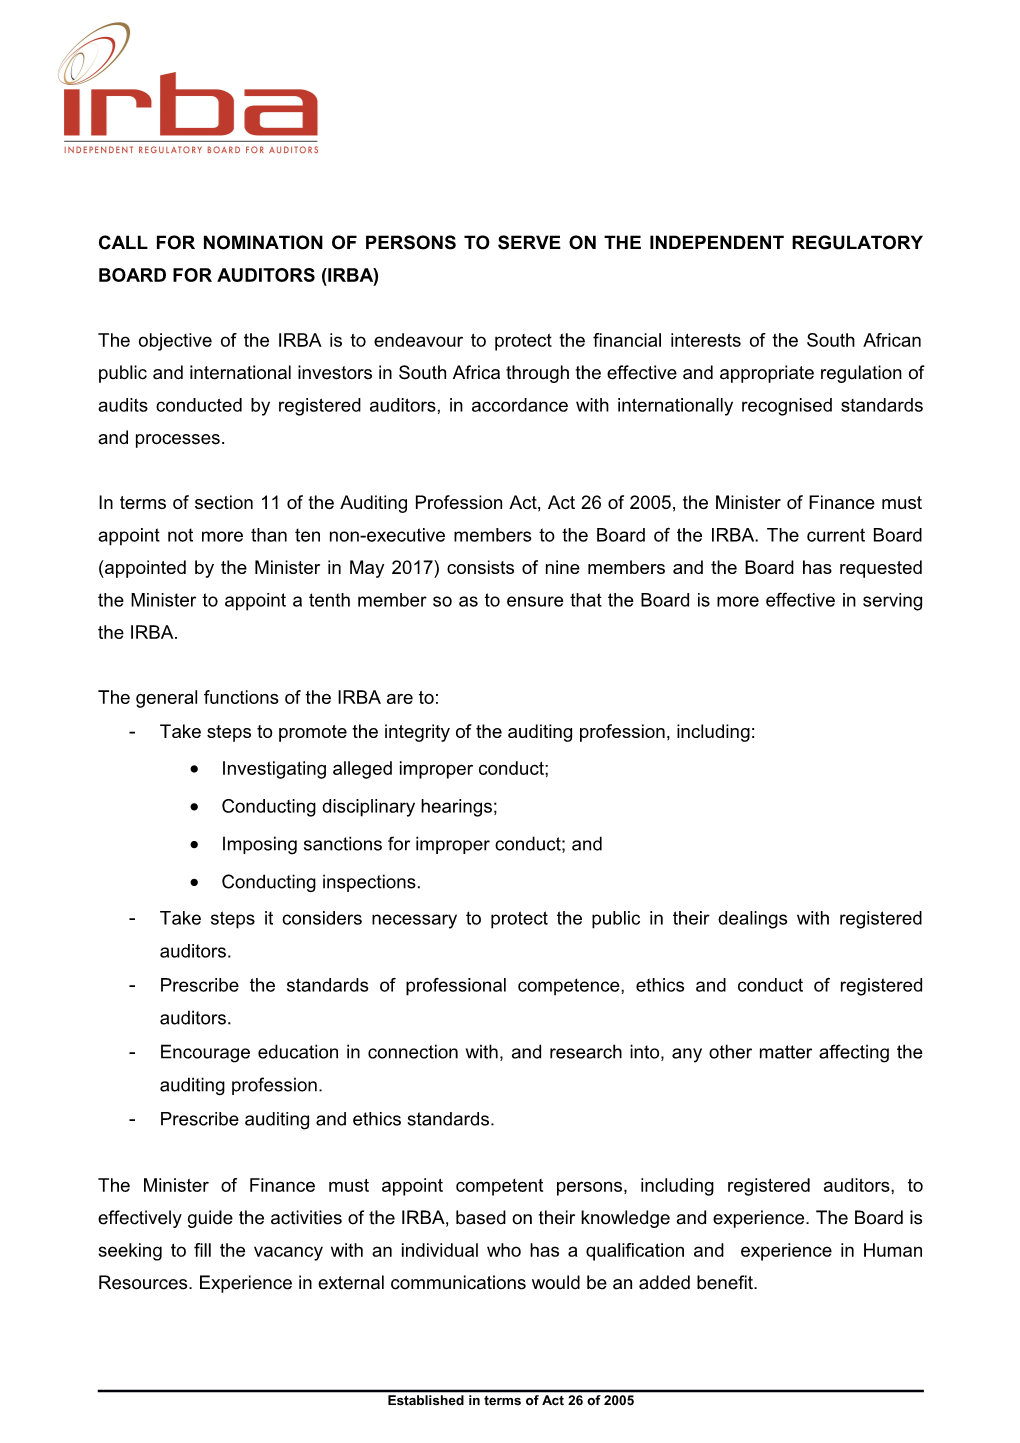 Call for Nomination of Persons to Serve on the Independent Regulatory Board for Auditors